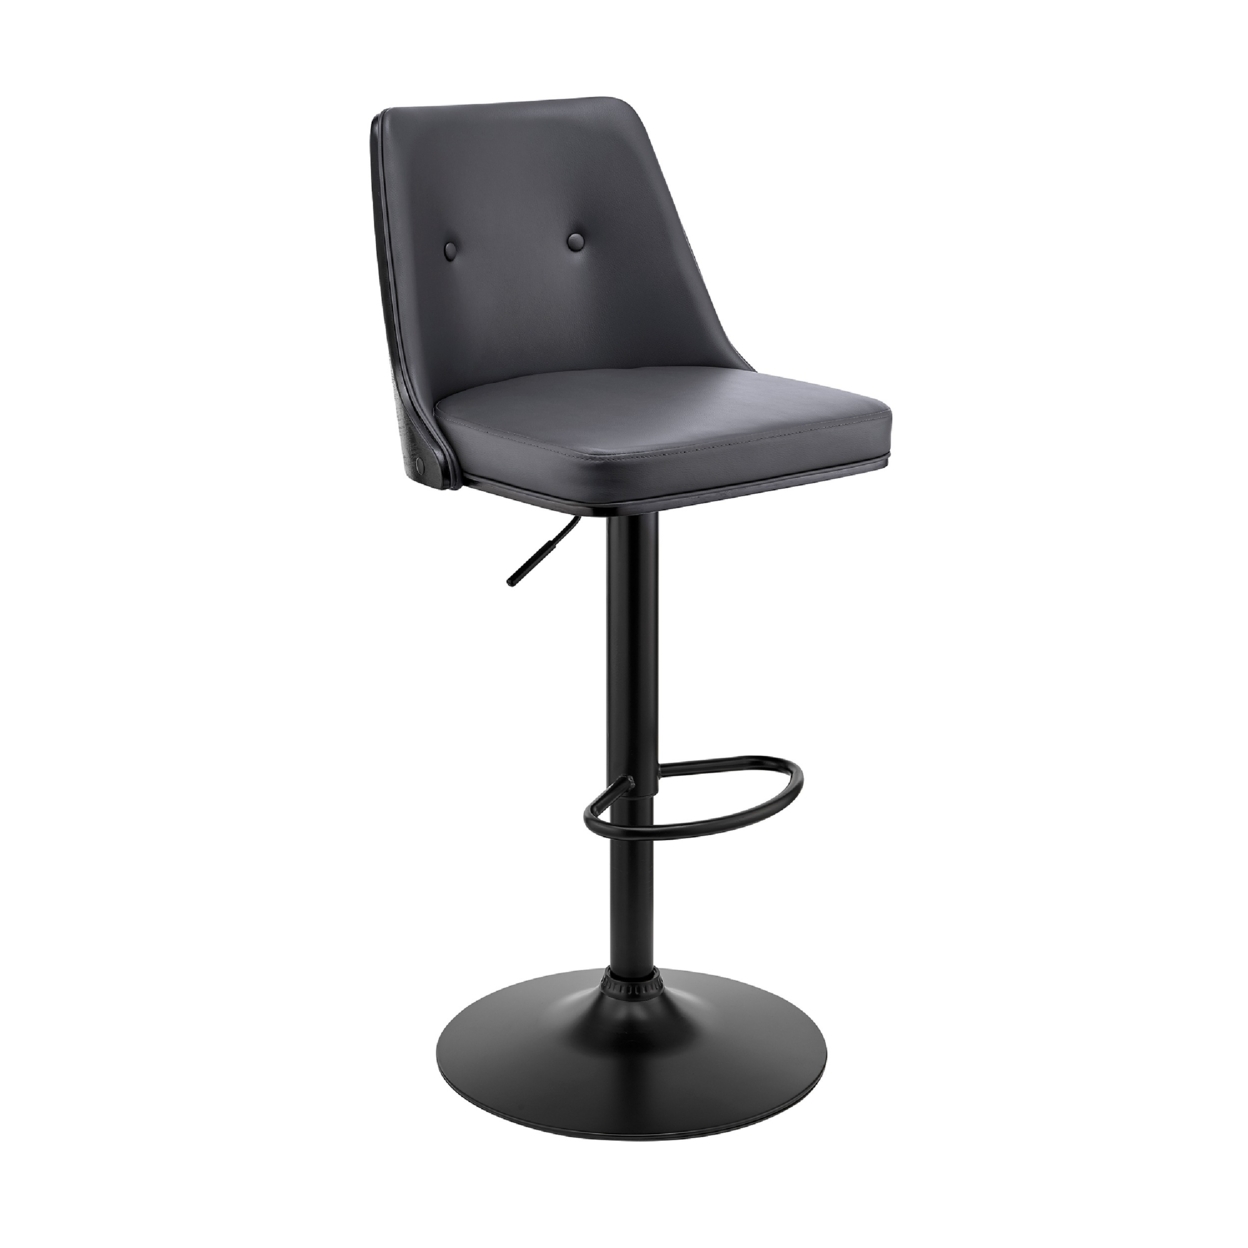 Adjustable Barstool With Faux Leather And Wooden Backing, Black- Saltoro Sherpi